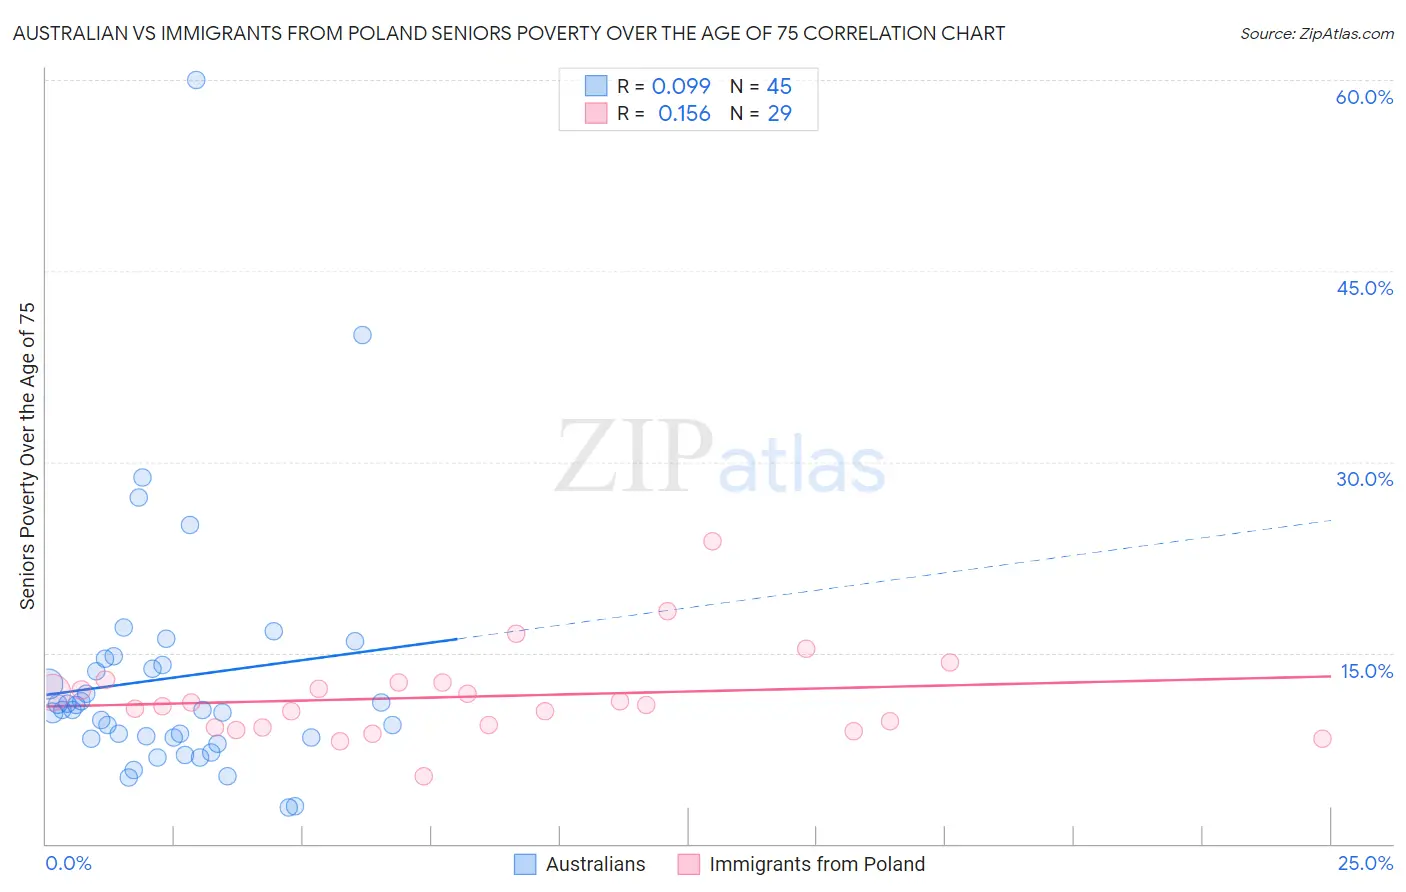 Australian vs Immigrants from Poland Seniors Poverty Over the Age of 75